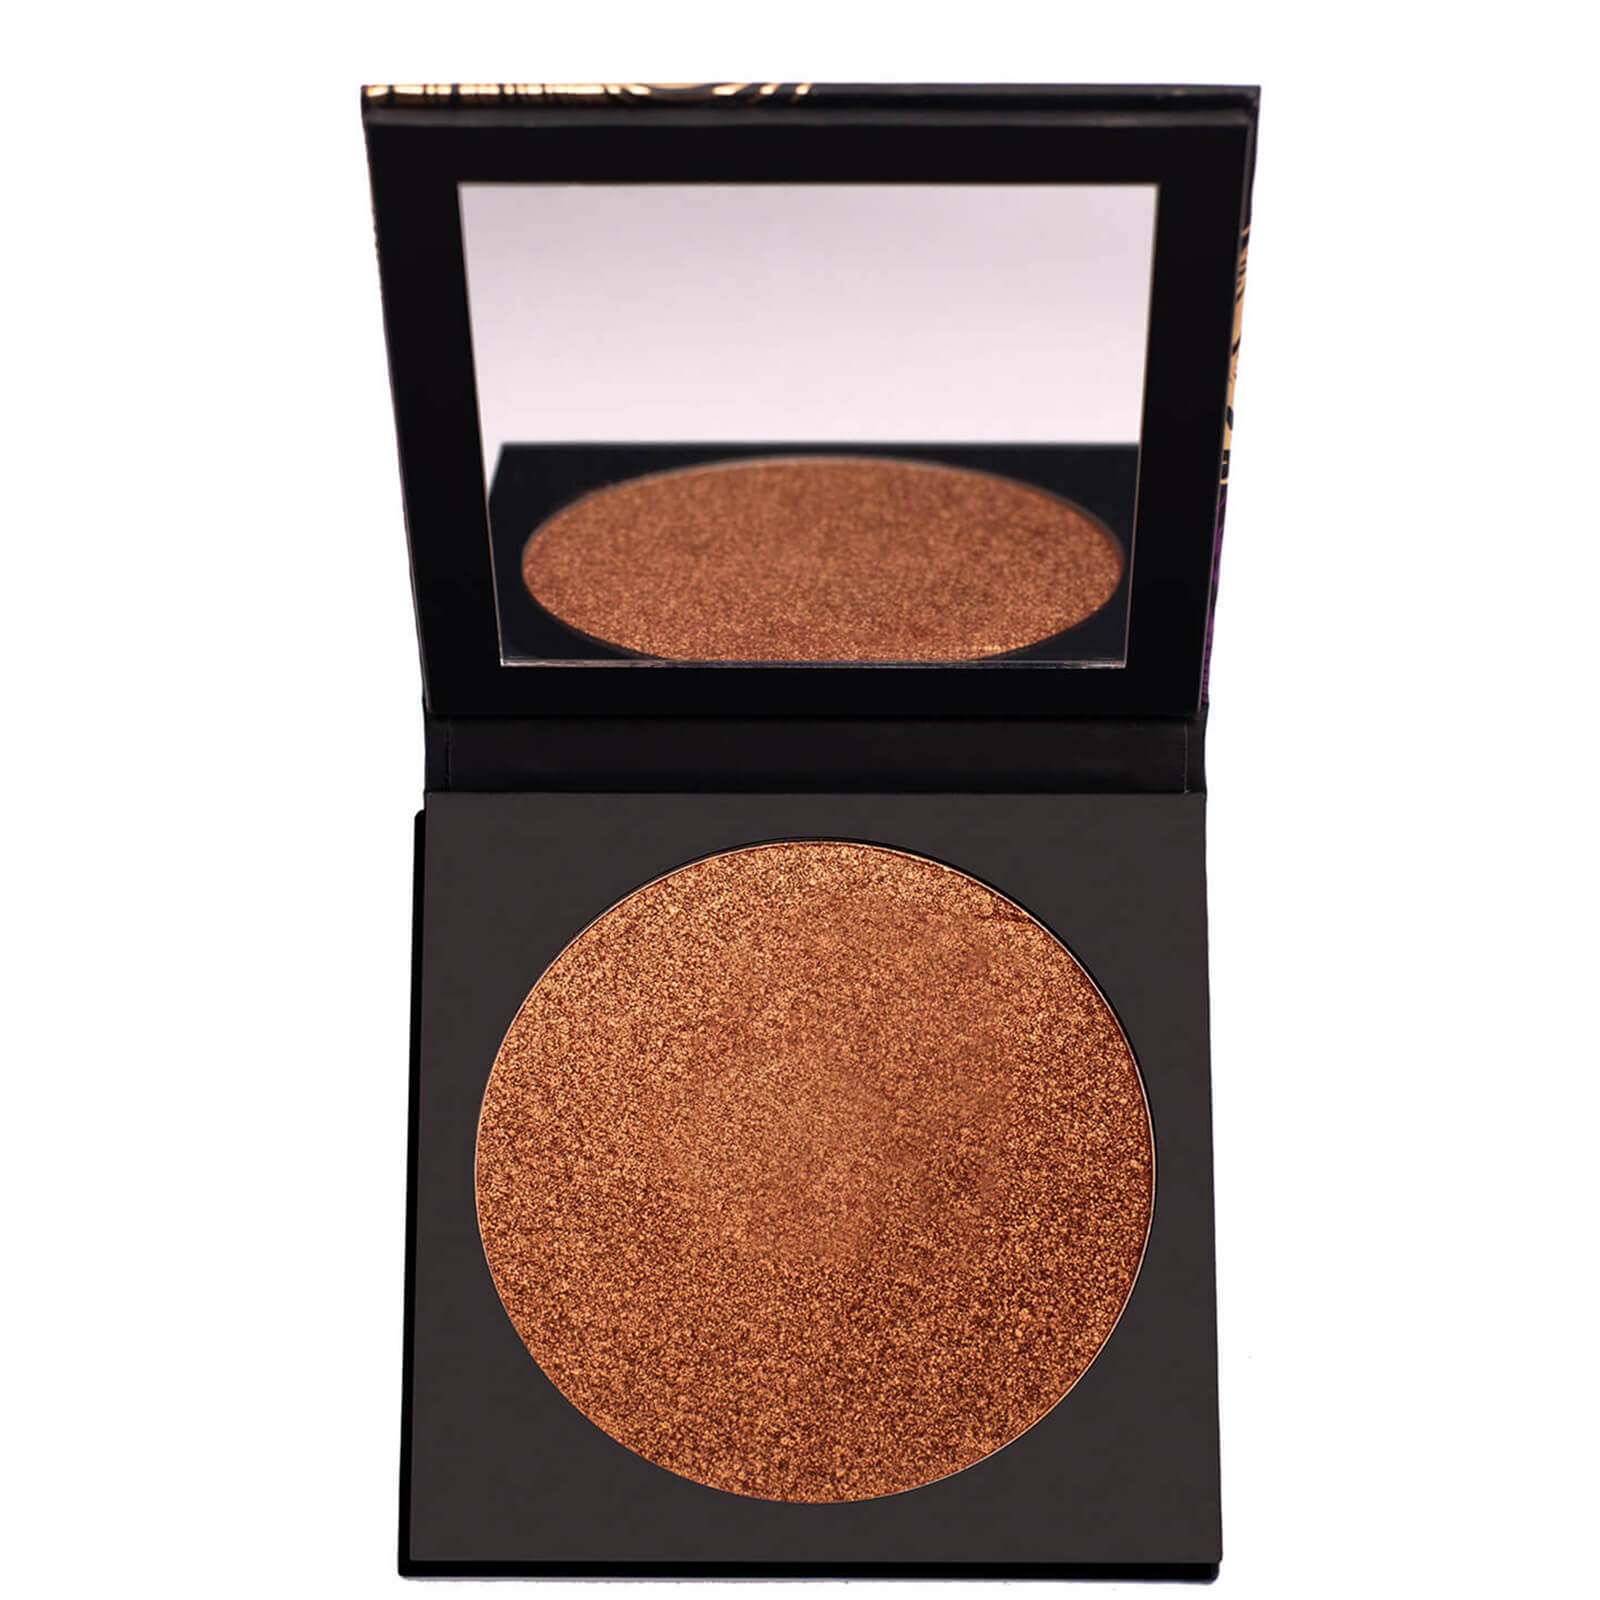 Image of UOMA Beauty Black Magic Carnival Bronze and Highlighter - Barbados